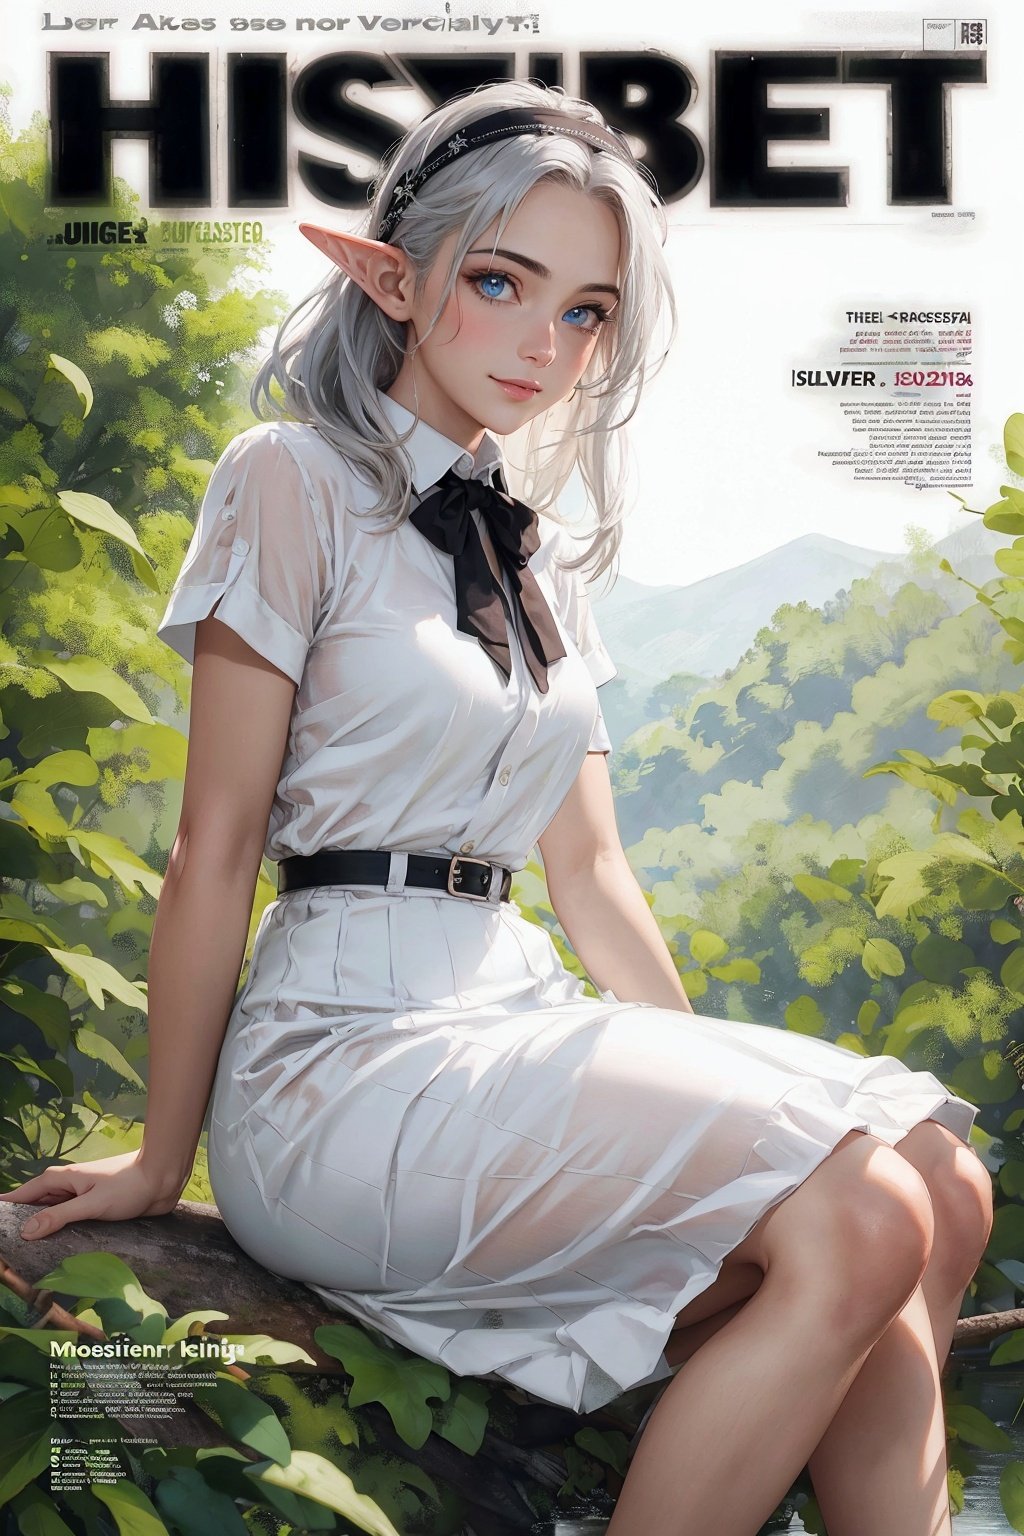 ((masterpiece)), expressionless, (((best quality))), ((illustration)),
1girl, elf, ((solo)), (detailed face), (beautiful detailed eyes), light eyes, blue eyes, ((disheveled hair)), silver hair, full body,
smile, blank stare, sitting, ((looking to the side)),
bow tie hair band, white transparent long skirt, noble, mysterious,
bright background, in forest, nature, sunshines through the leaves, butterfly, river, close-up,
(magazine:1.3), (cover-style:1.3), fashionable, woman, vibrant, outfit, posing, front, colorful, dynamic, background, elements, confident, expression, holding, statement, accessory, majestic, coiled, around, touch, scene, text, cover, bold, attention-grabbing, title, stylish, font, catchy, headline, larger, striking, modern, trendy, focus, fashion,